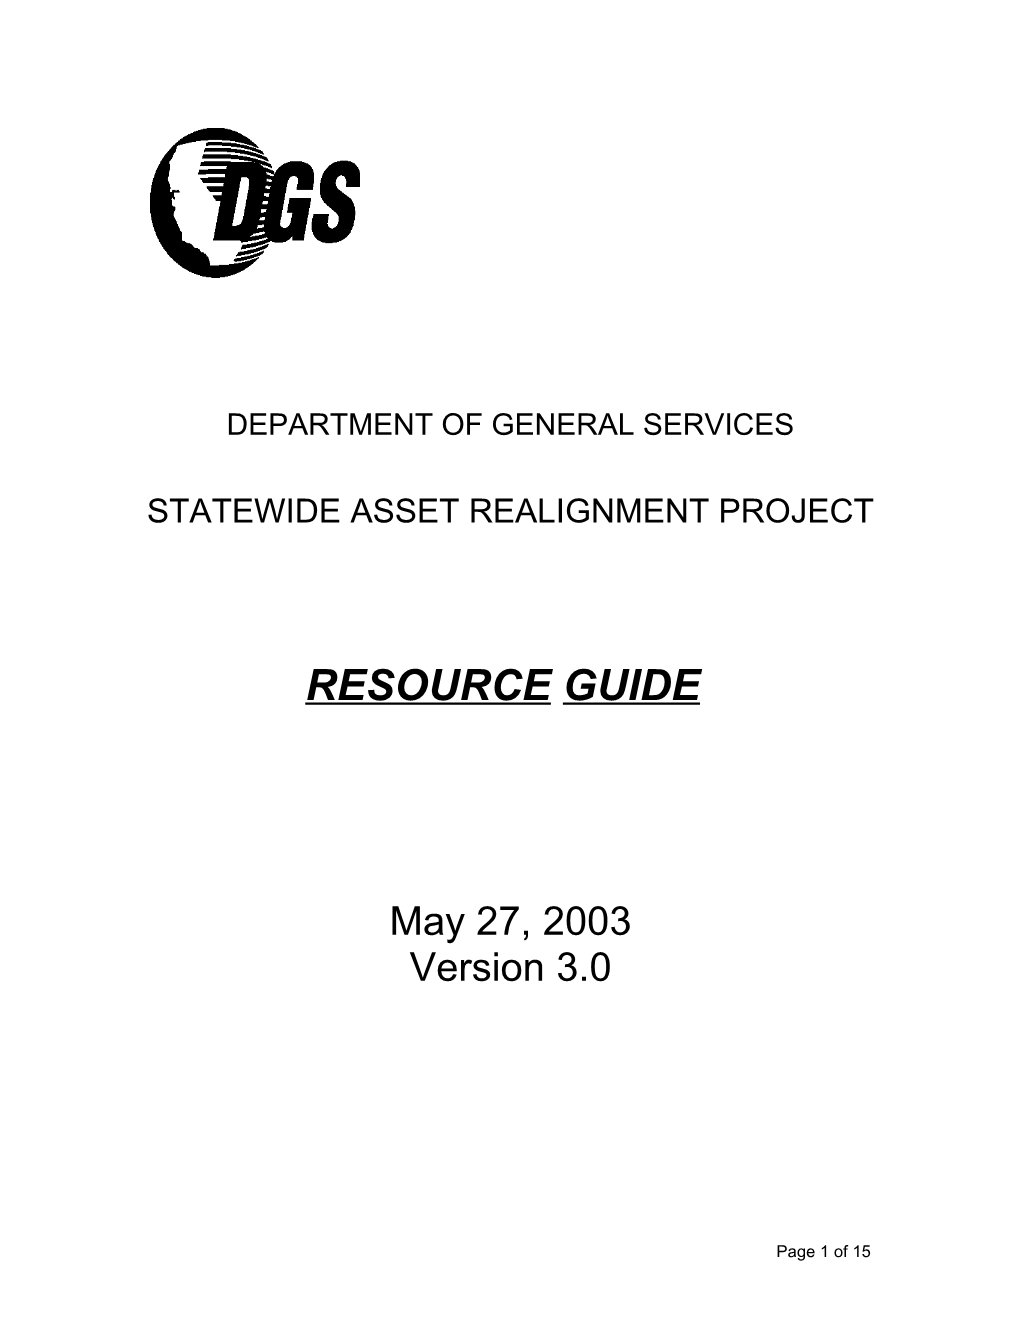 RESOURCE GUIDE for Asset Realignment